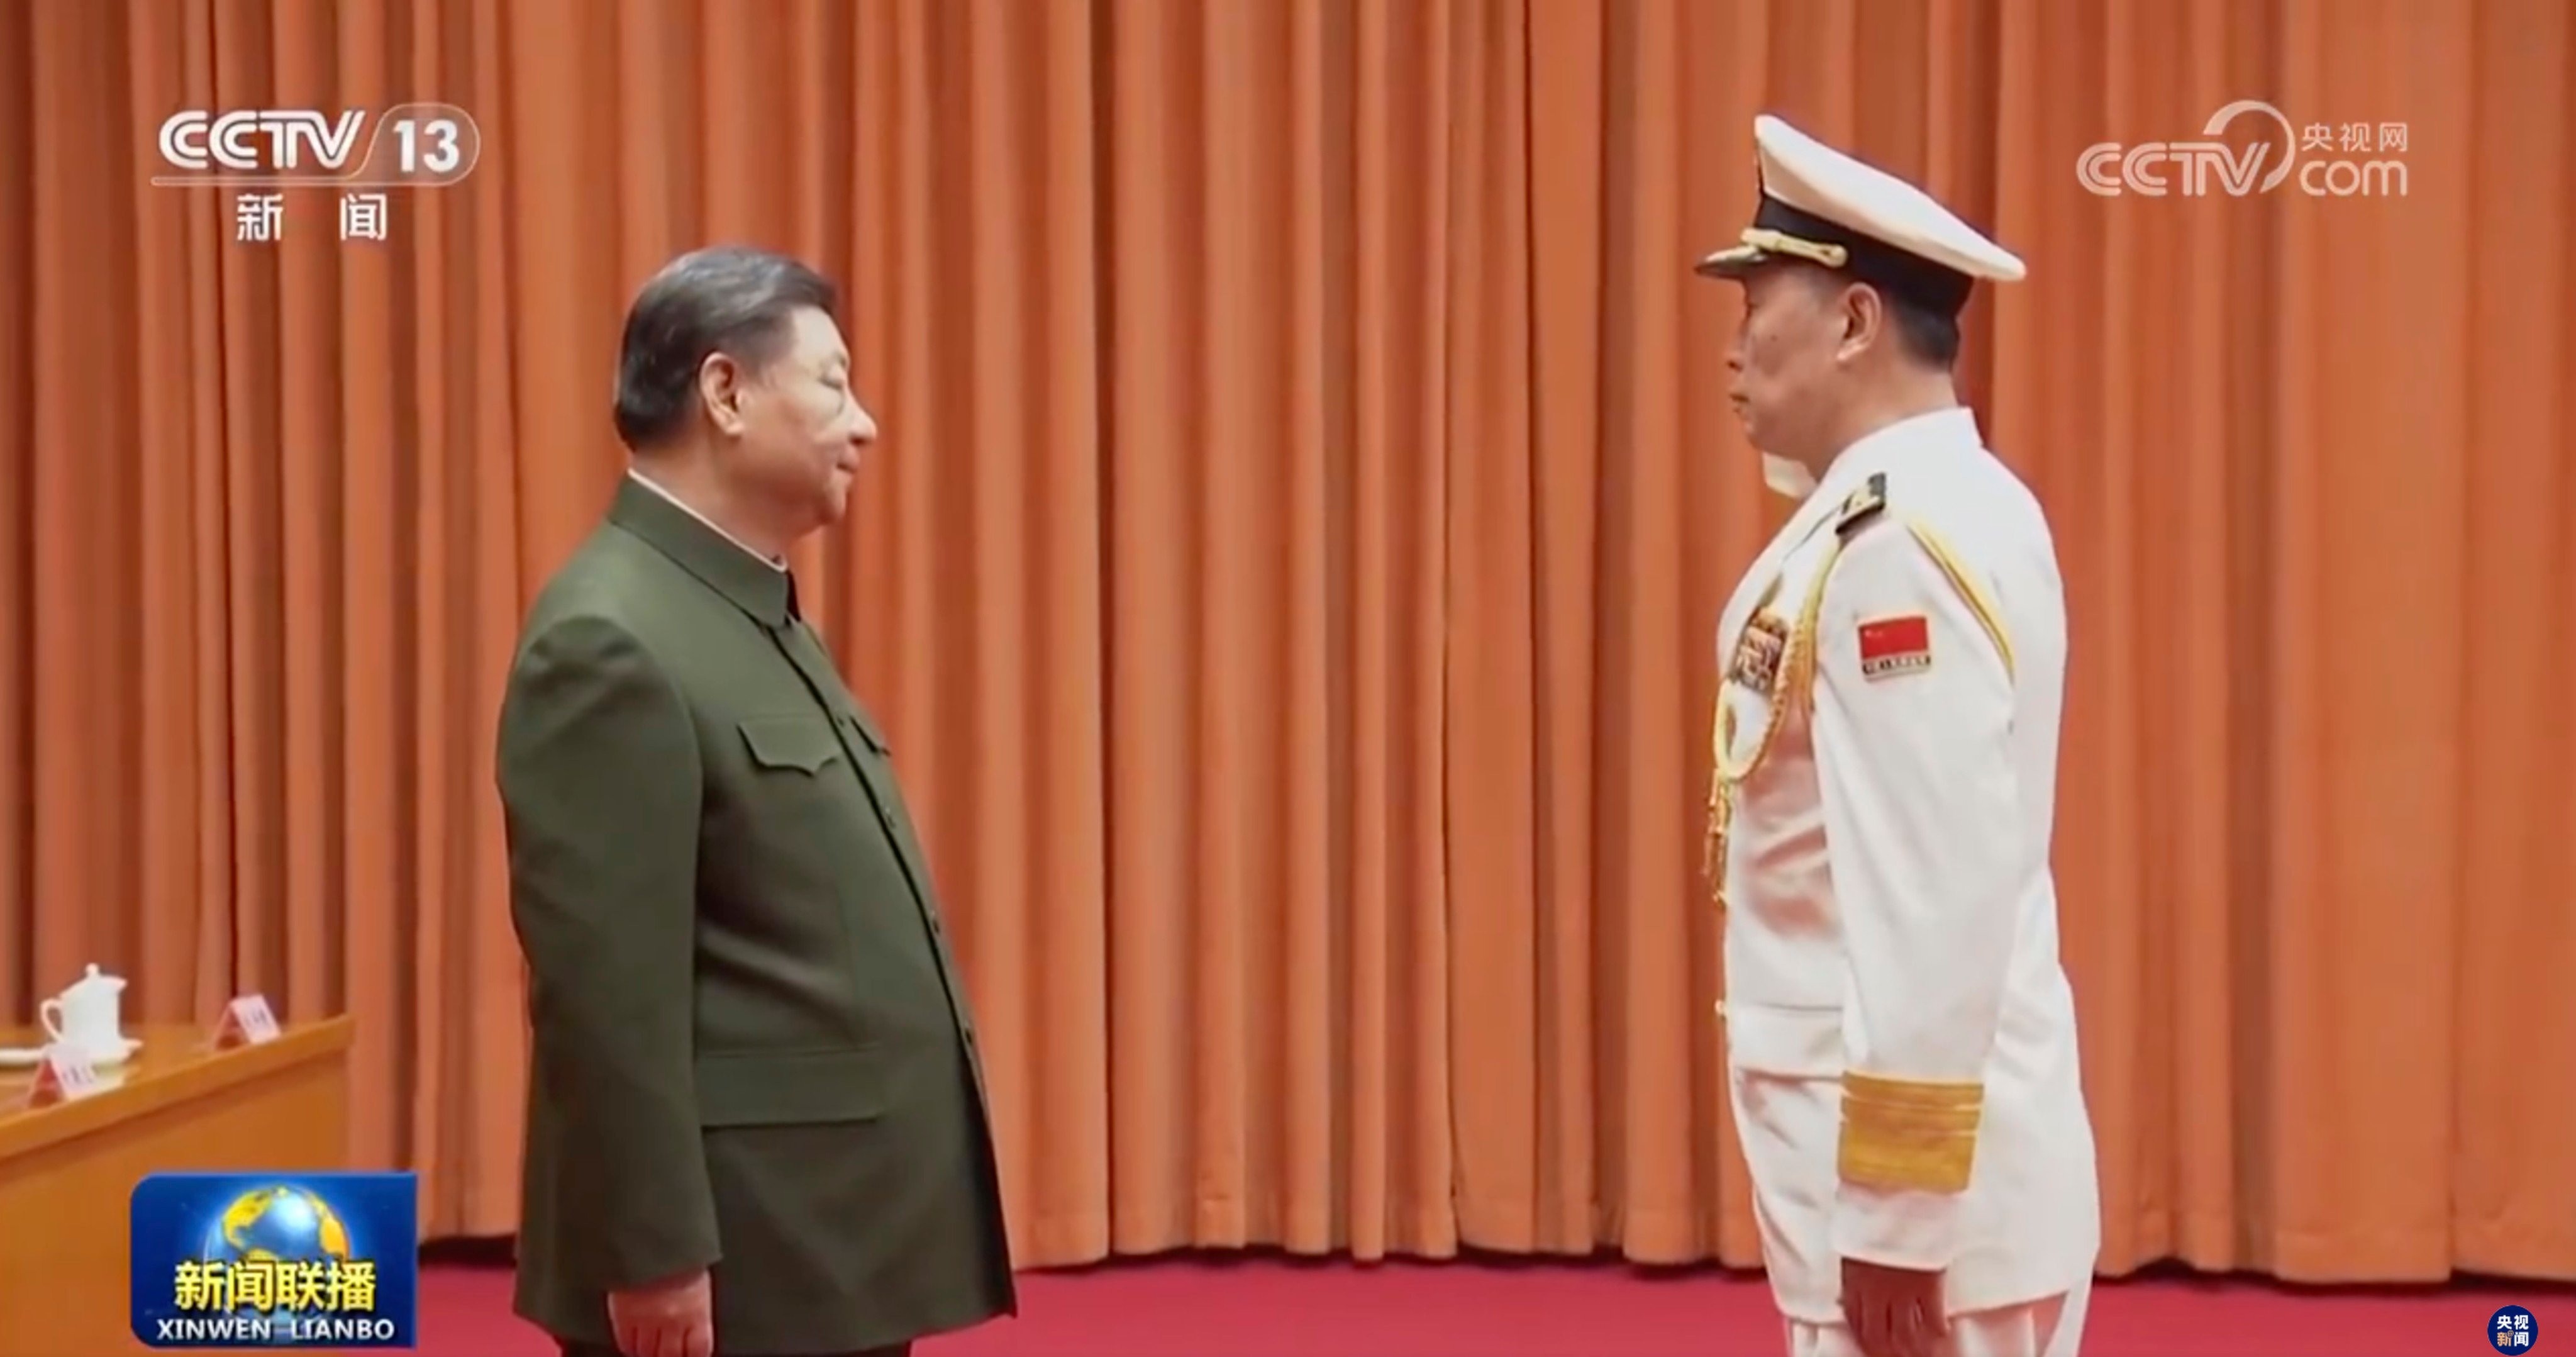 Chinese President Xi Jinping congratulates naval commander Hu Zhongming, commander of the navy, and Wang Wenquan, on his promotion to admiral. Photo: CCTV